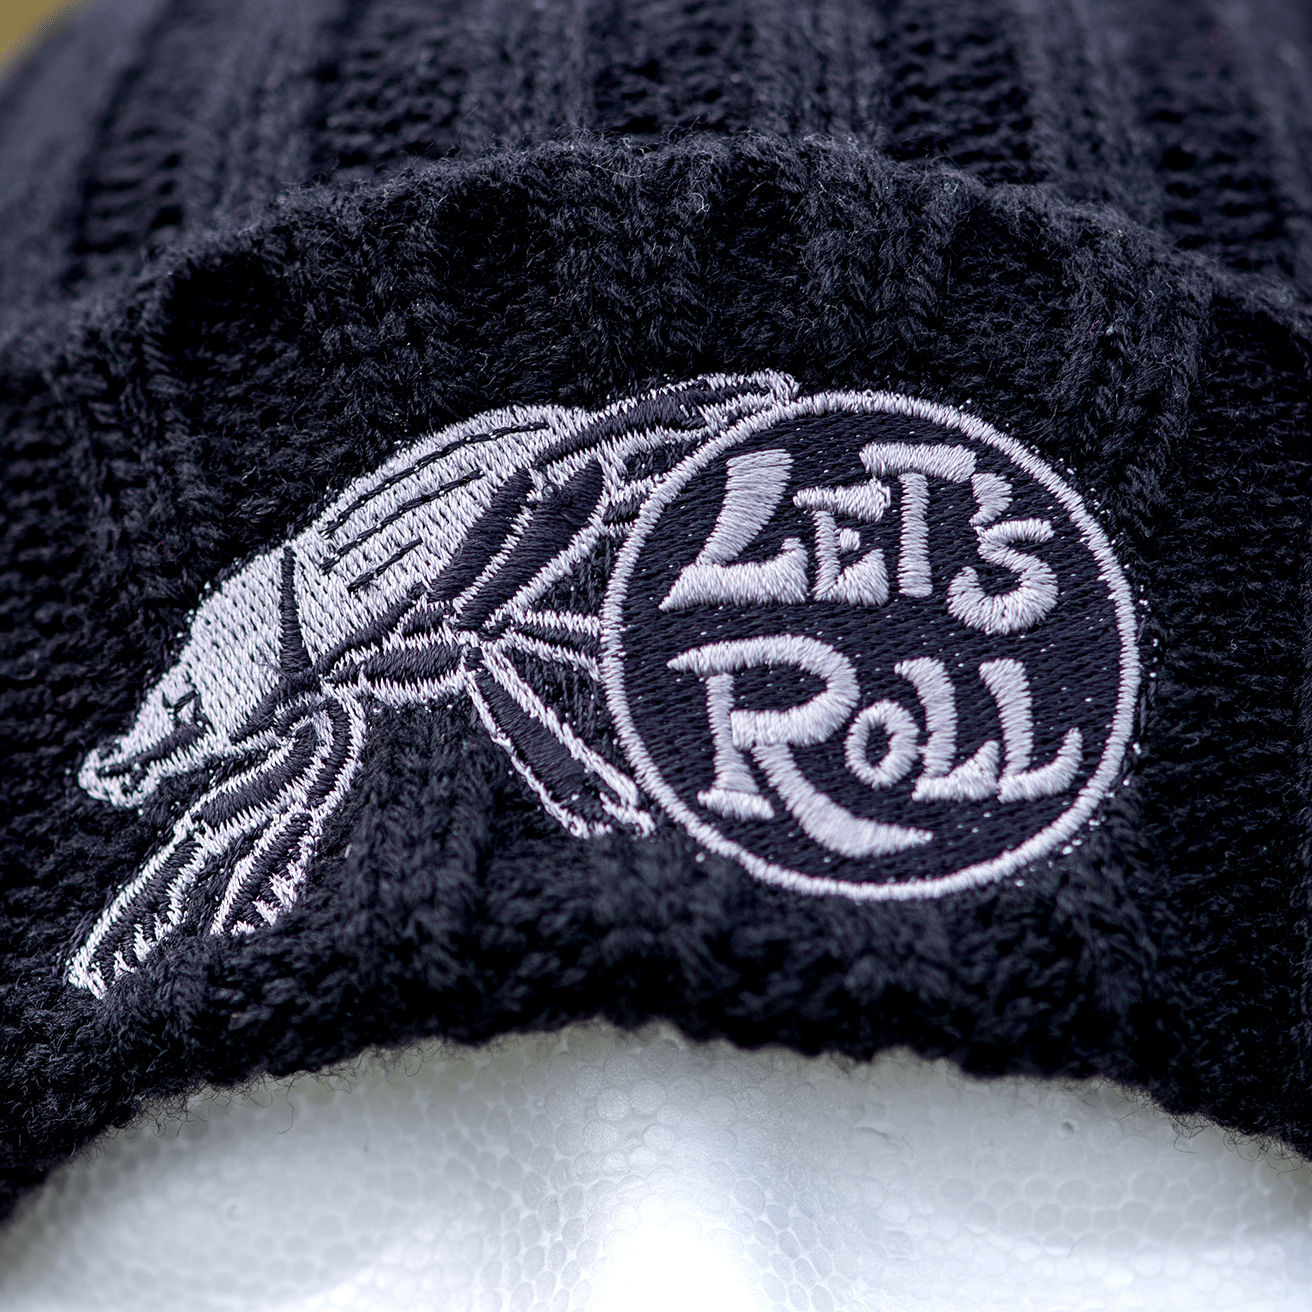 "Let's Roll" Dung Beetle Hat by The Roving House